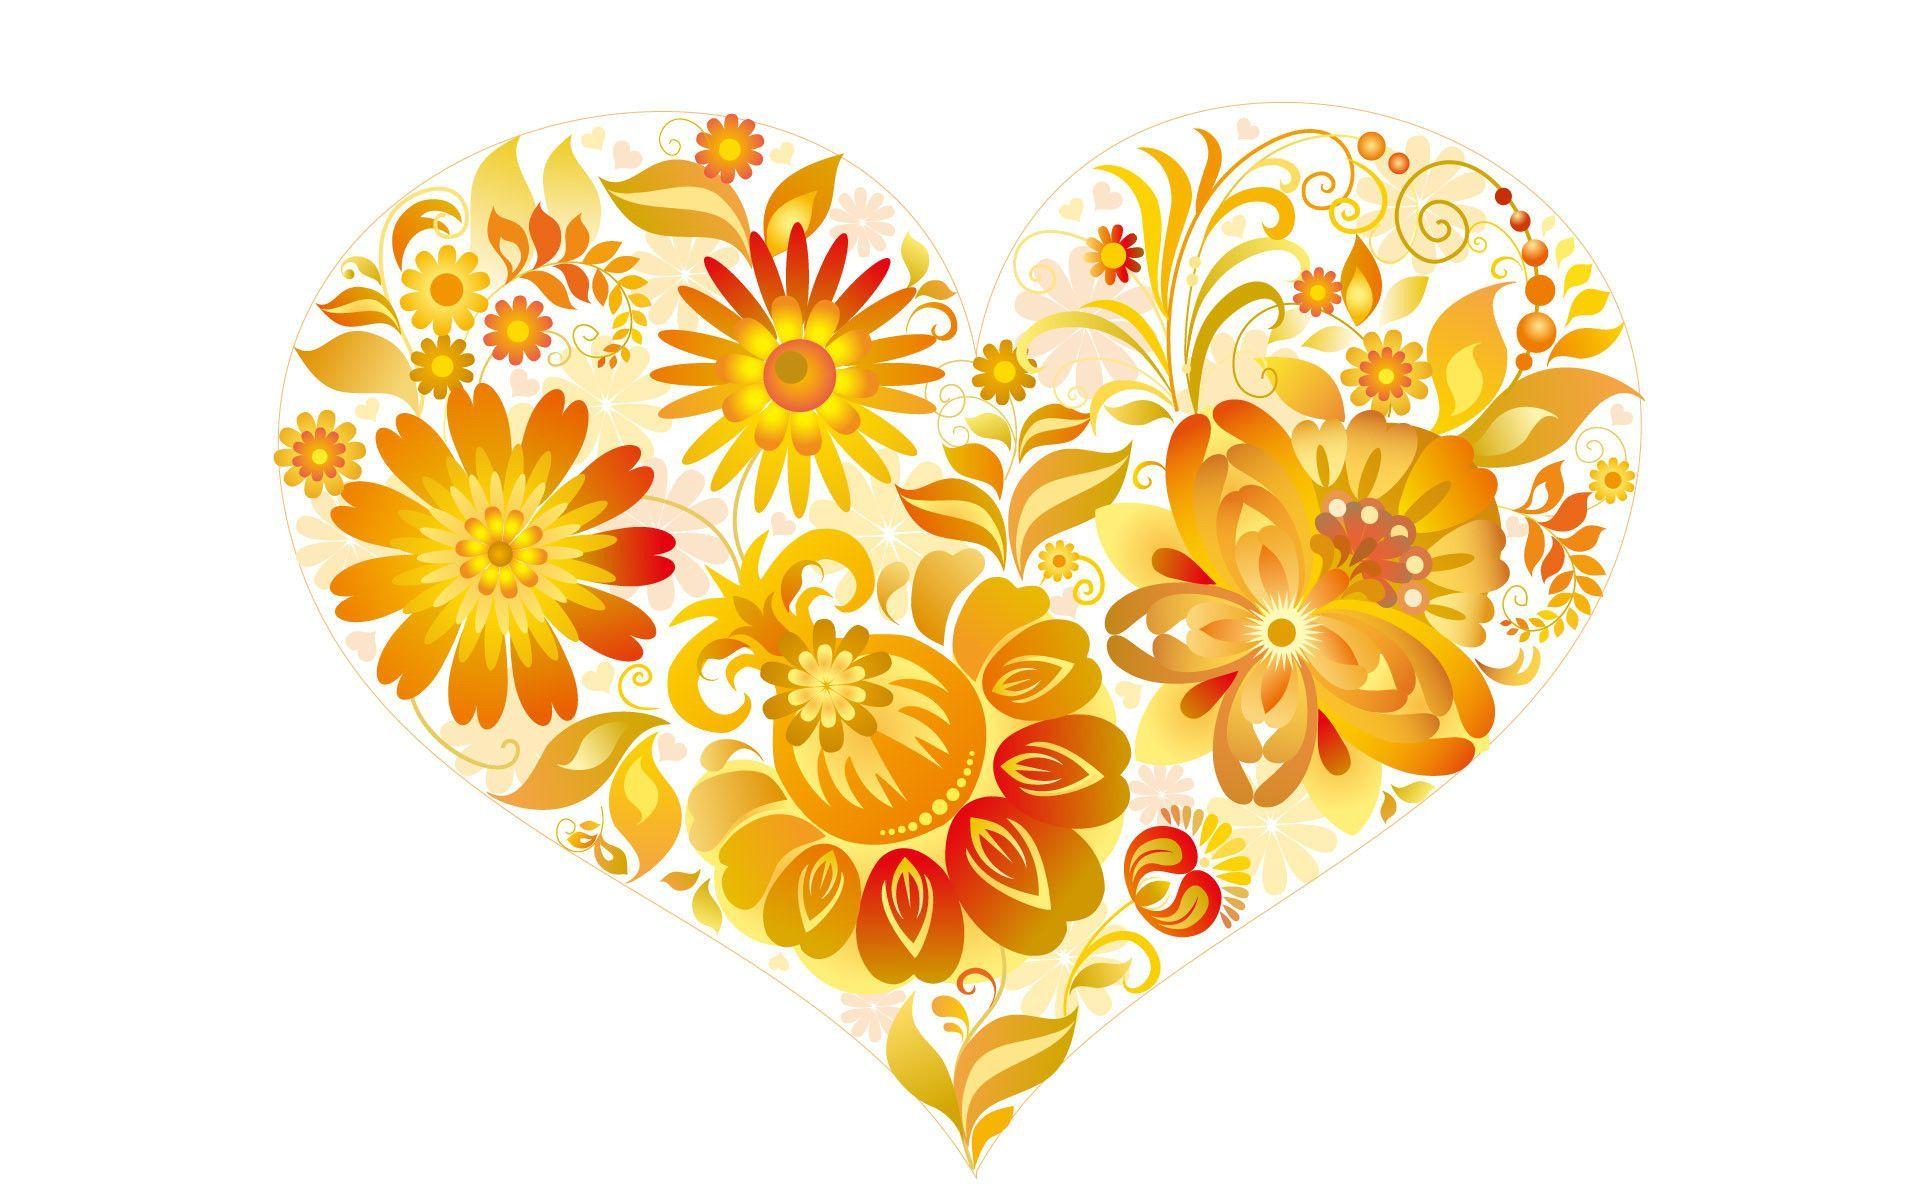 Love Heart with Flowers Wallpaper